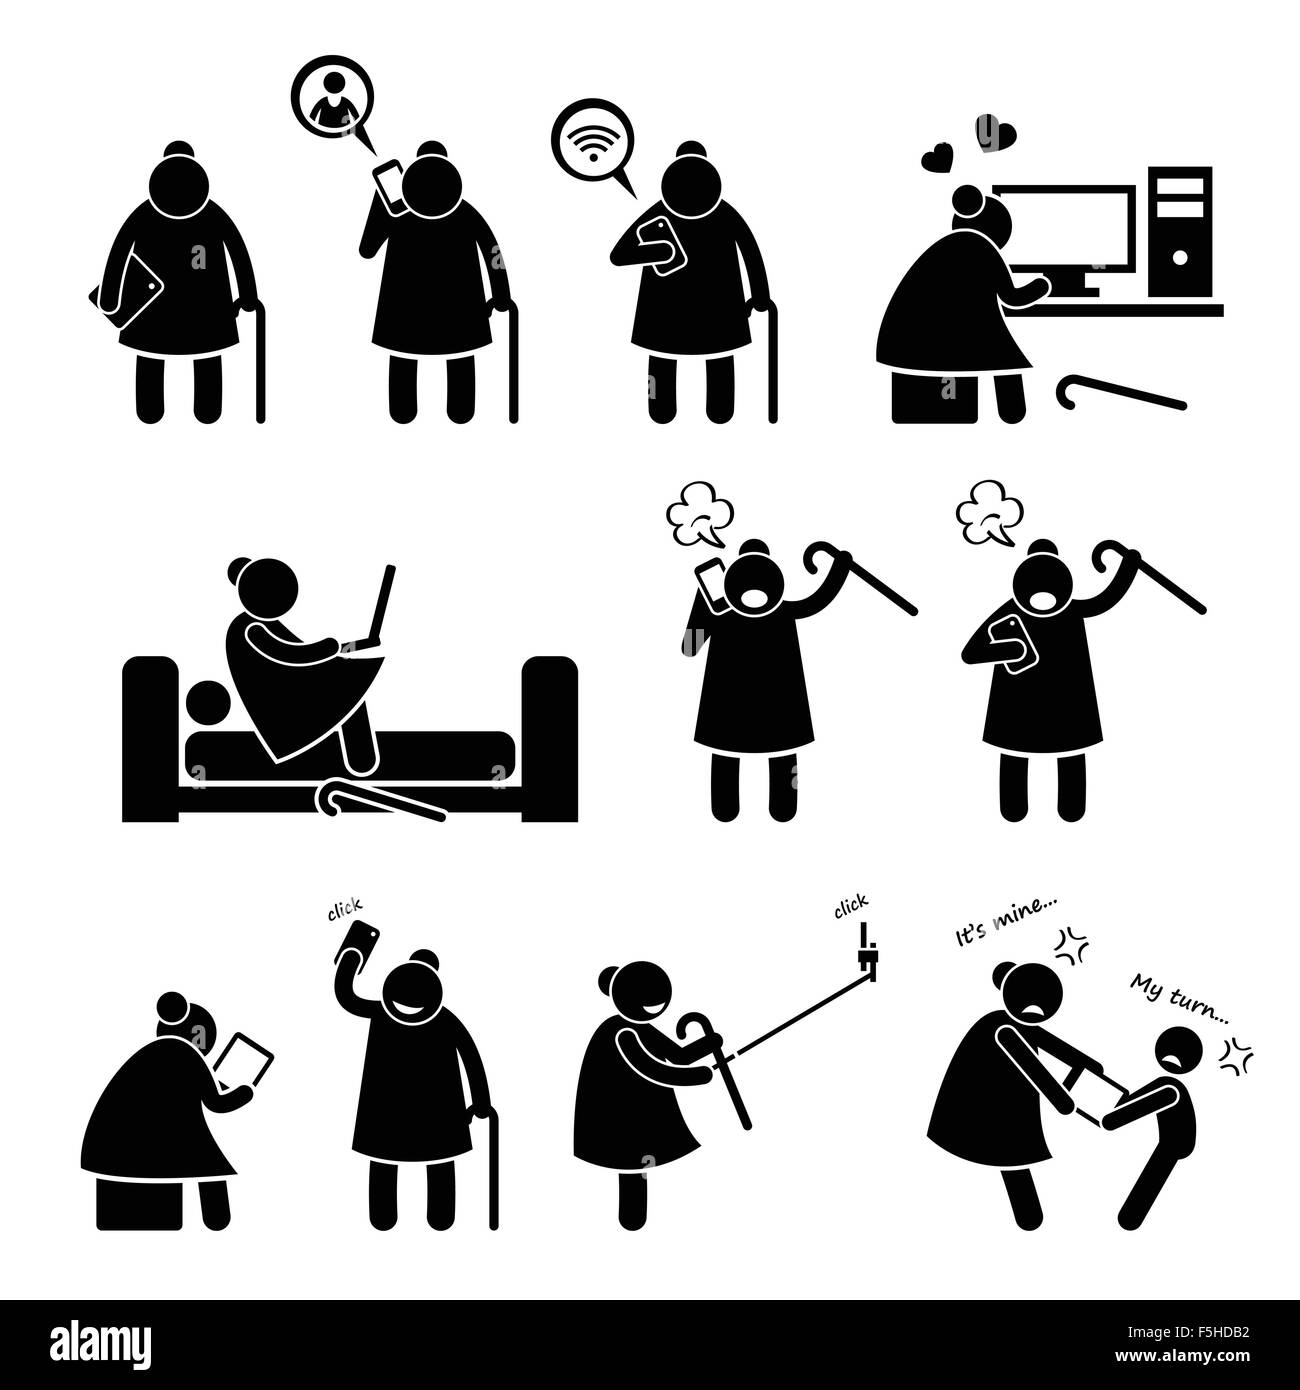 High Tech Granny Elderly Old Woman Using Computer and Smartphone Stick Figure Pictogram Icons Stock Vector